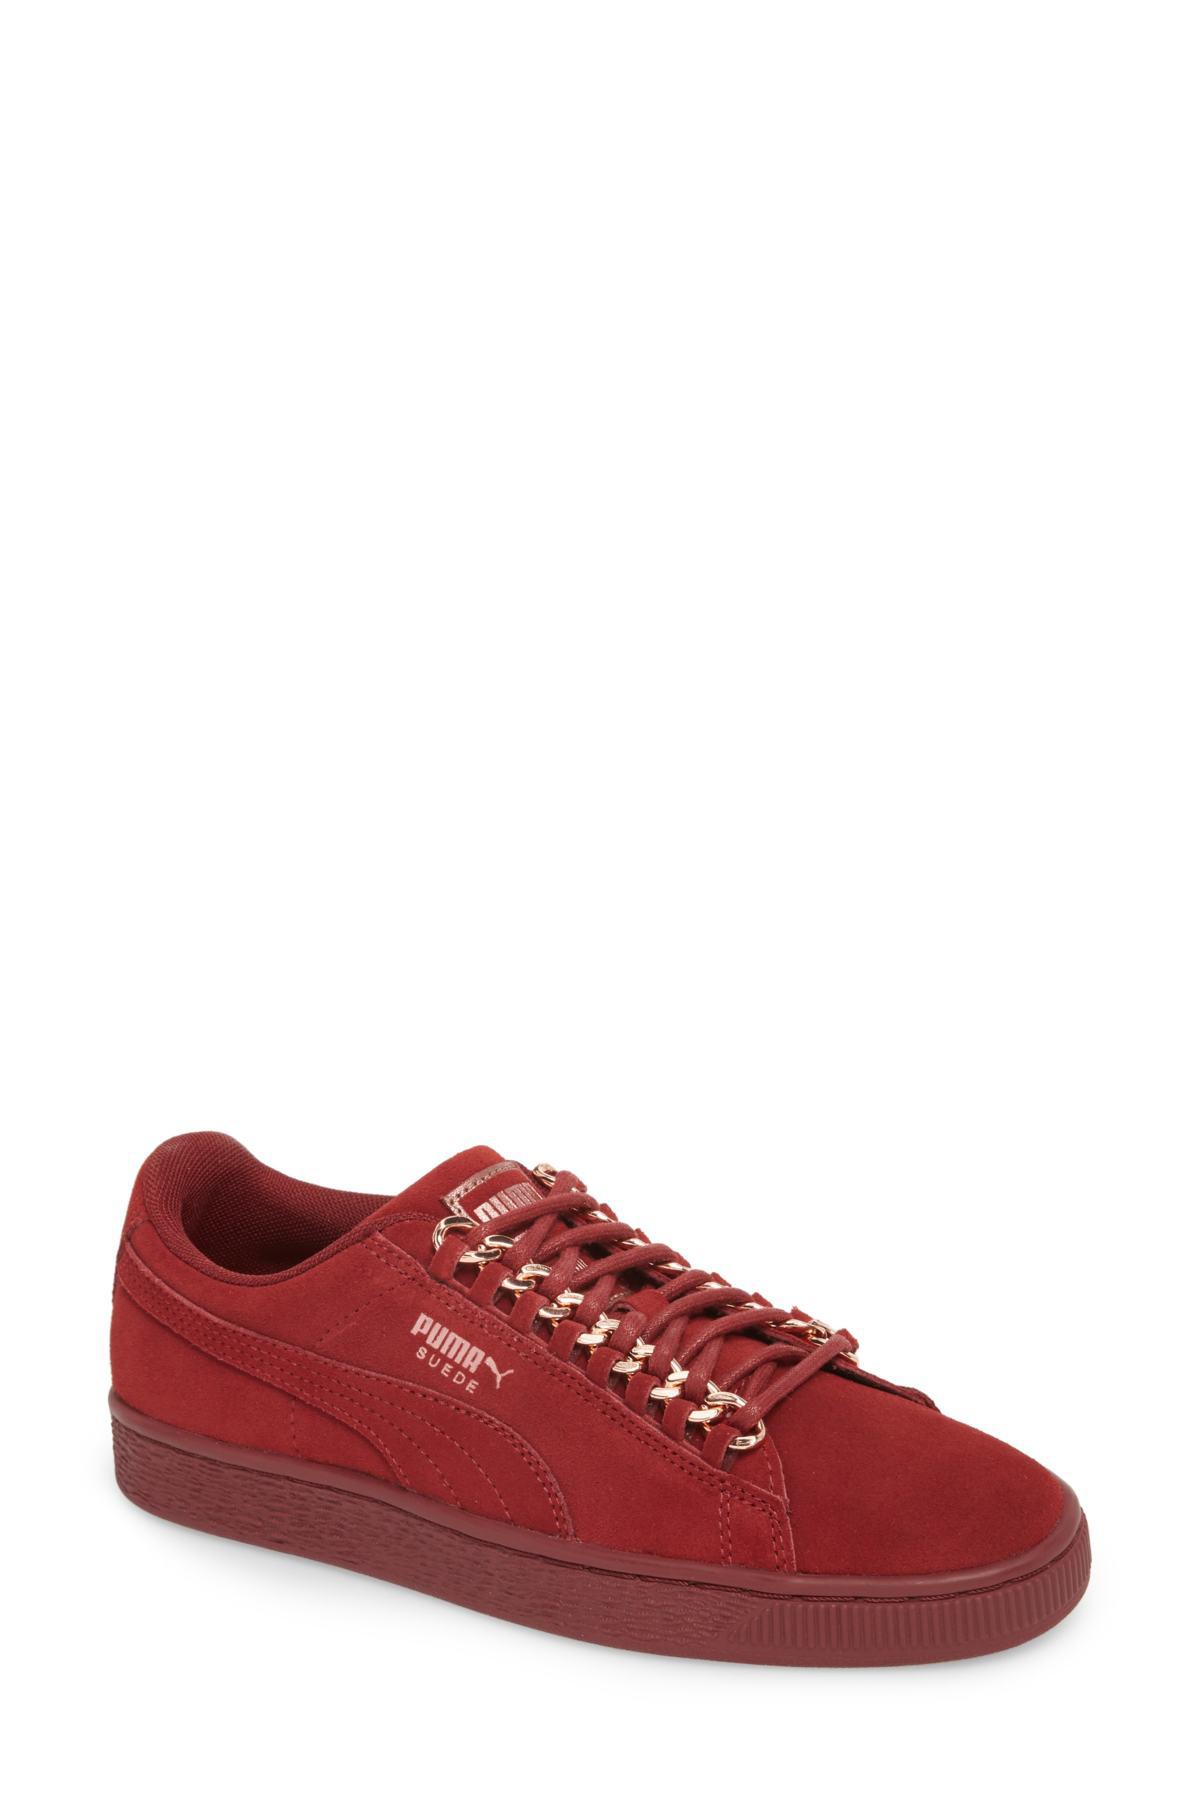 PUMA Lace Suede Classic X-chain (pomegranate/rose Gold) Shoes in Red | Lyst